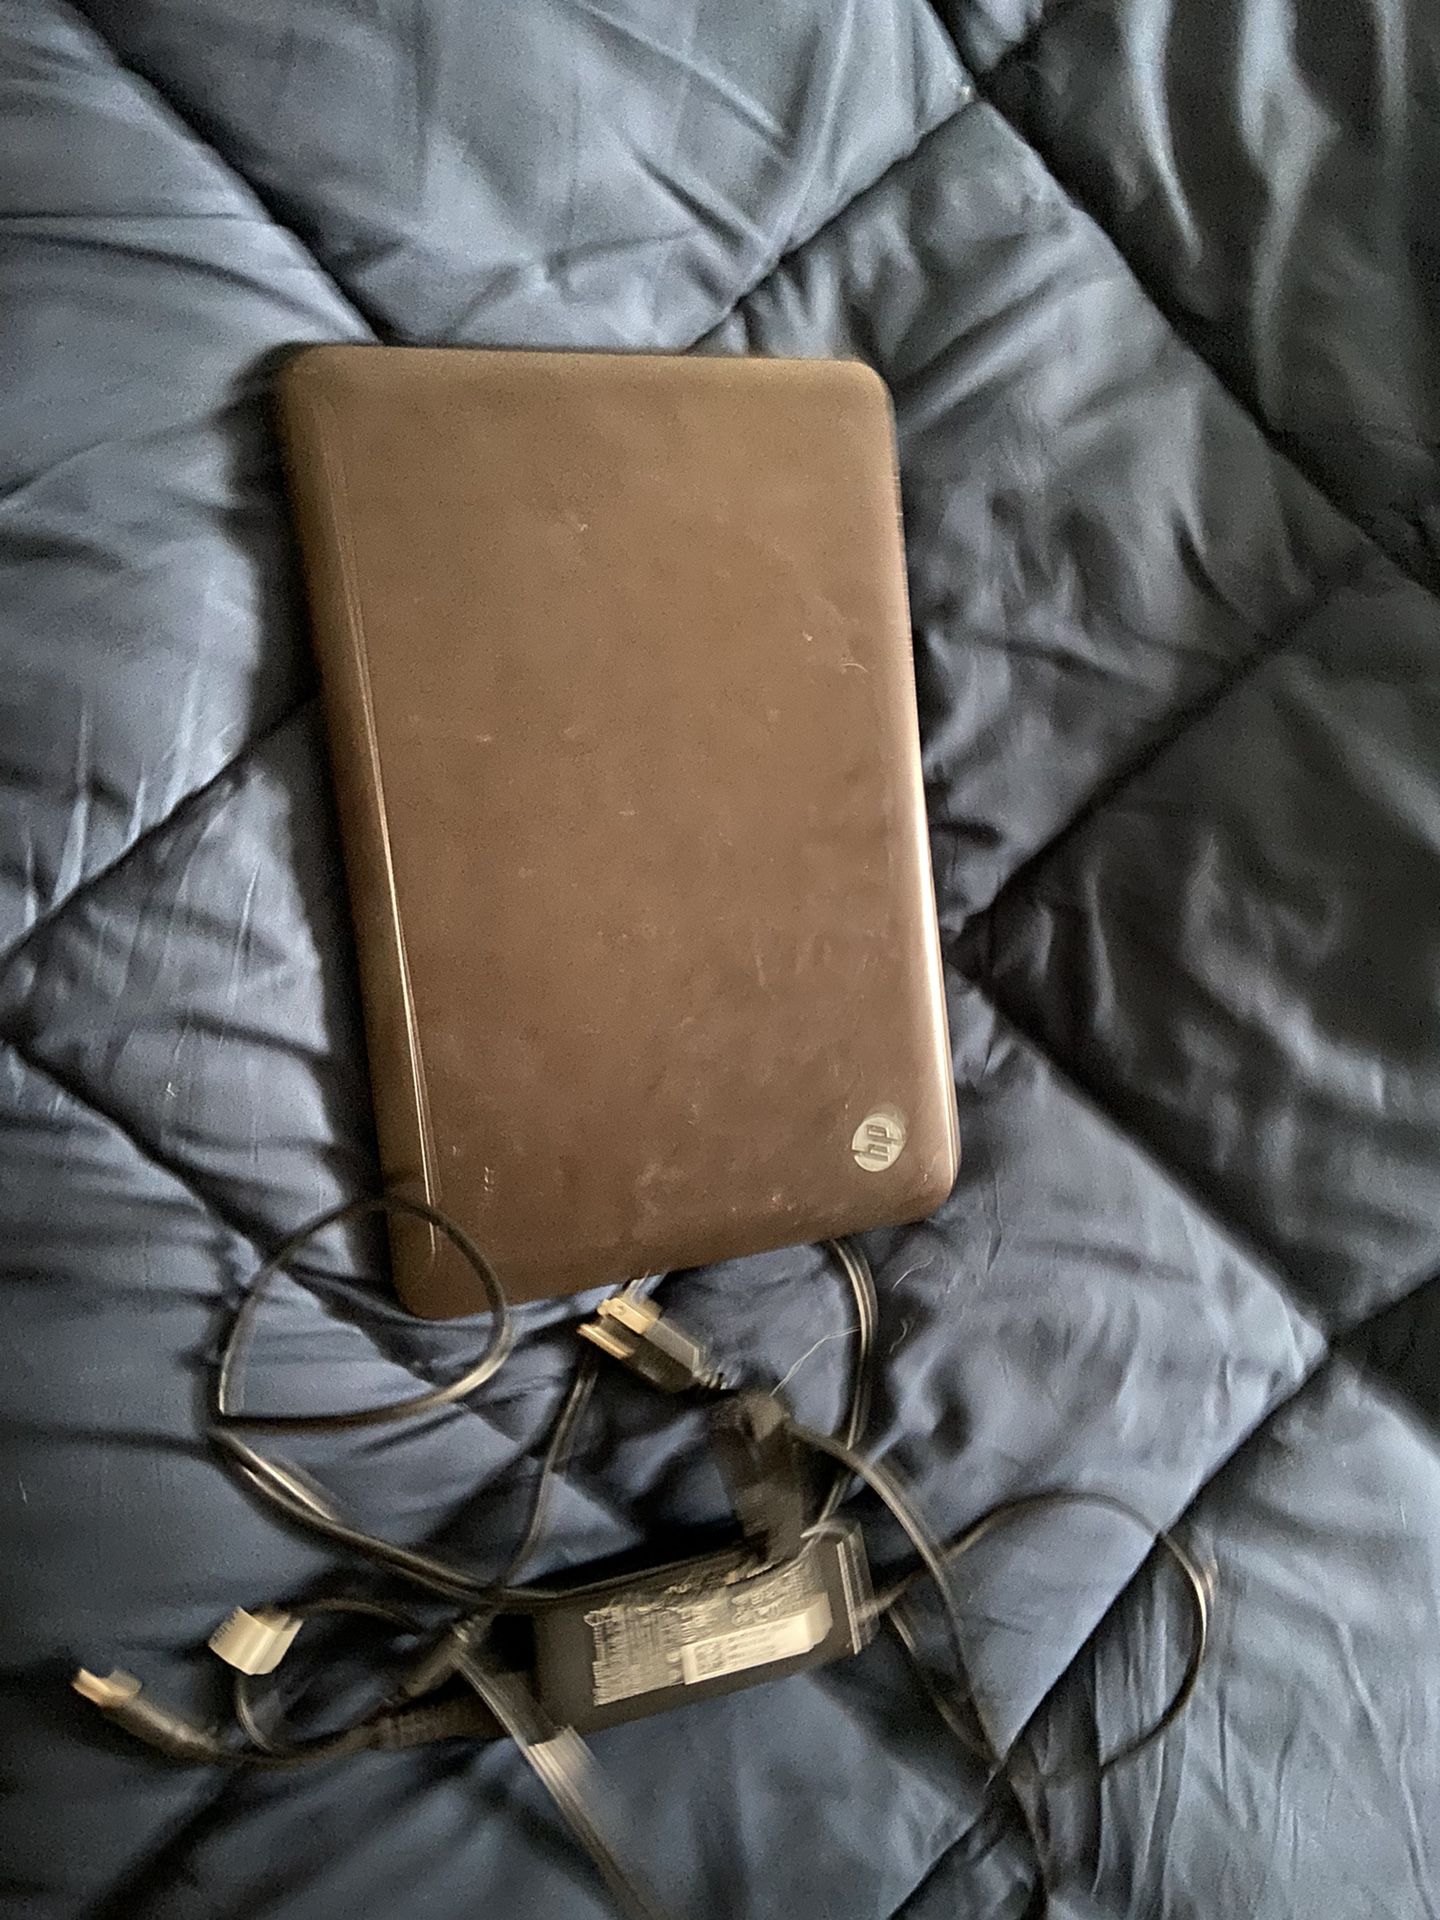 Hp Laptop For Trade Or Sale 